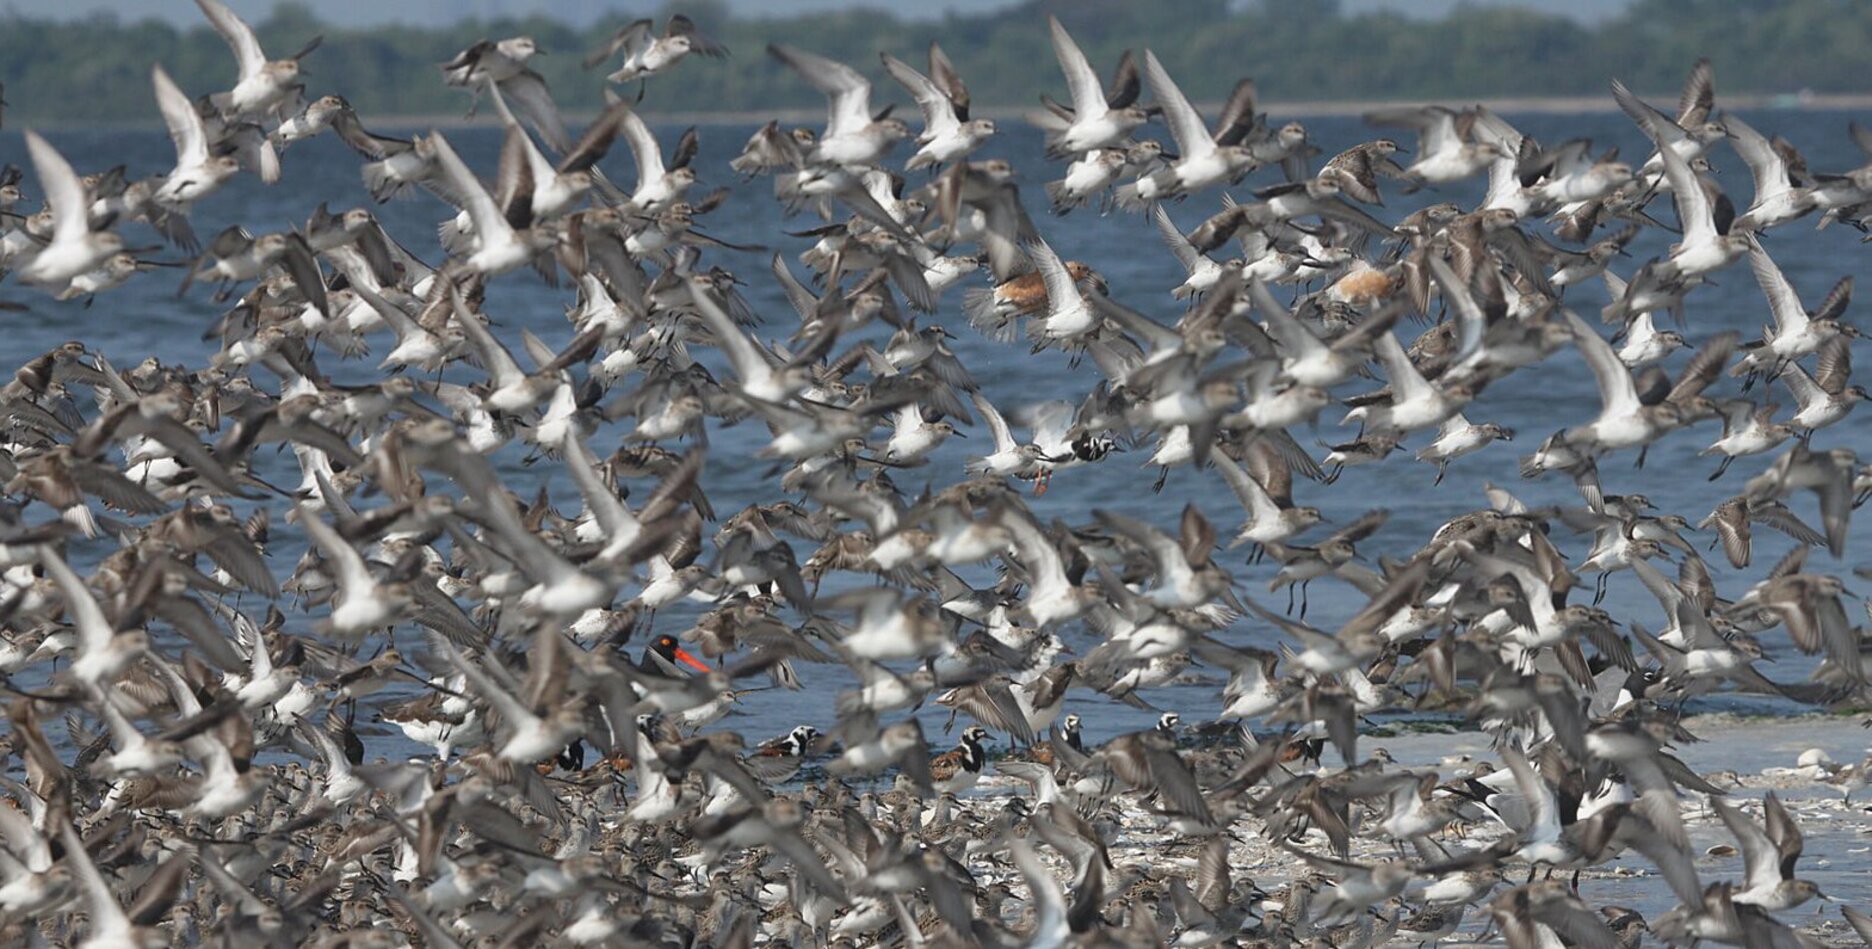 Shorebirds visit Jamaica Bay in great numbers in both spring and late summer. Here Red Knots, Semipalmated Sandpipers, Ruddy Turnstones, and American Oystercatchers feed amongst spawning Horseshoe Crabs. Photo: <a href="https://www.facebook.com/don.riepe.14" target="_blank">Don Riepe</a>